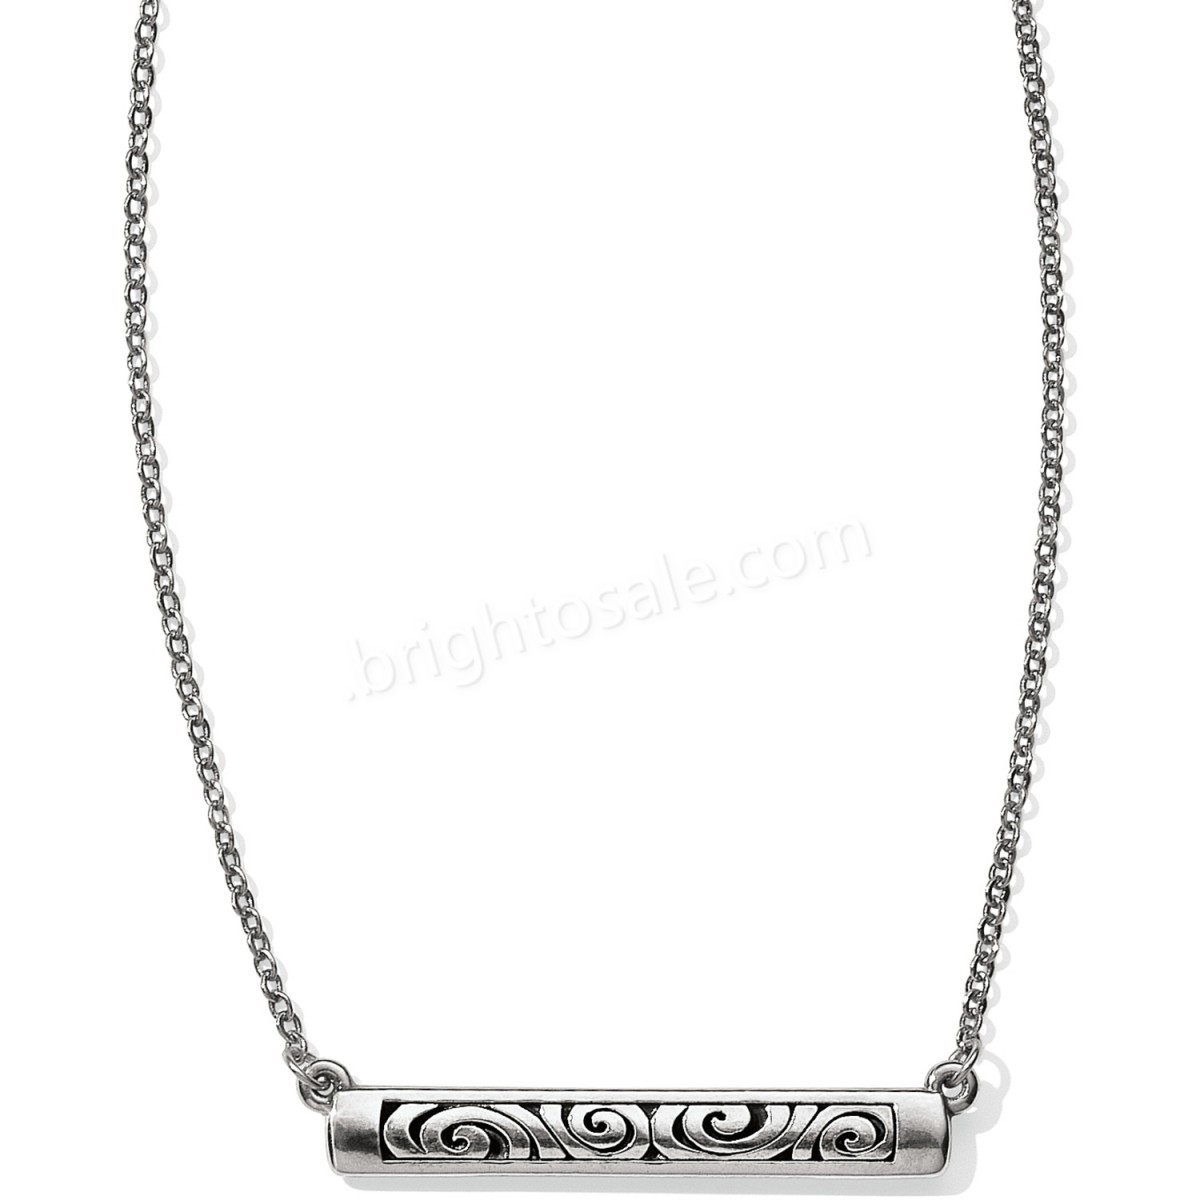 Brighton Collectibles & Online Discount London Groove Mini Bar Reversible Necklace - -1